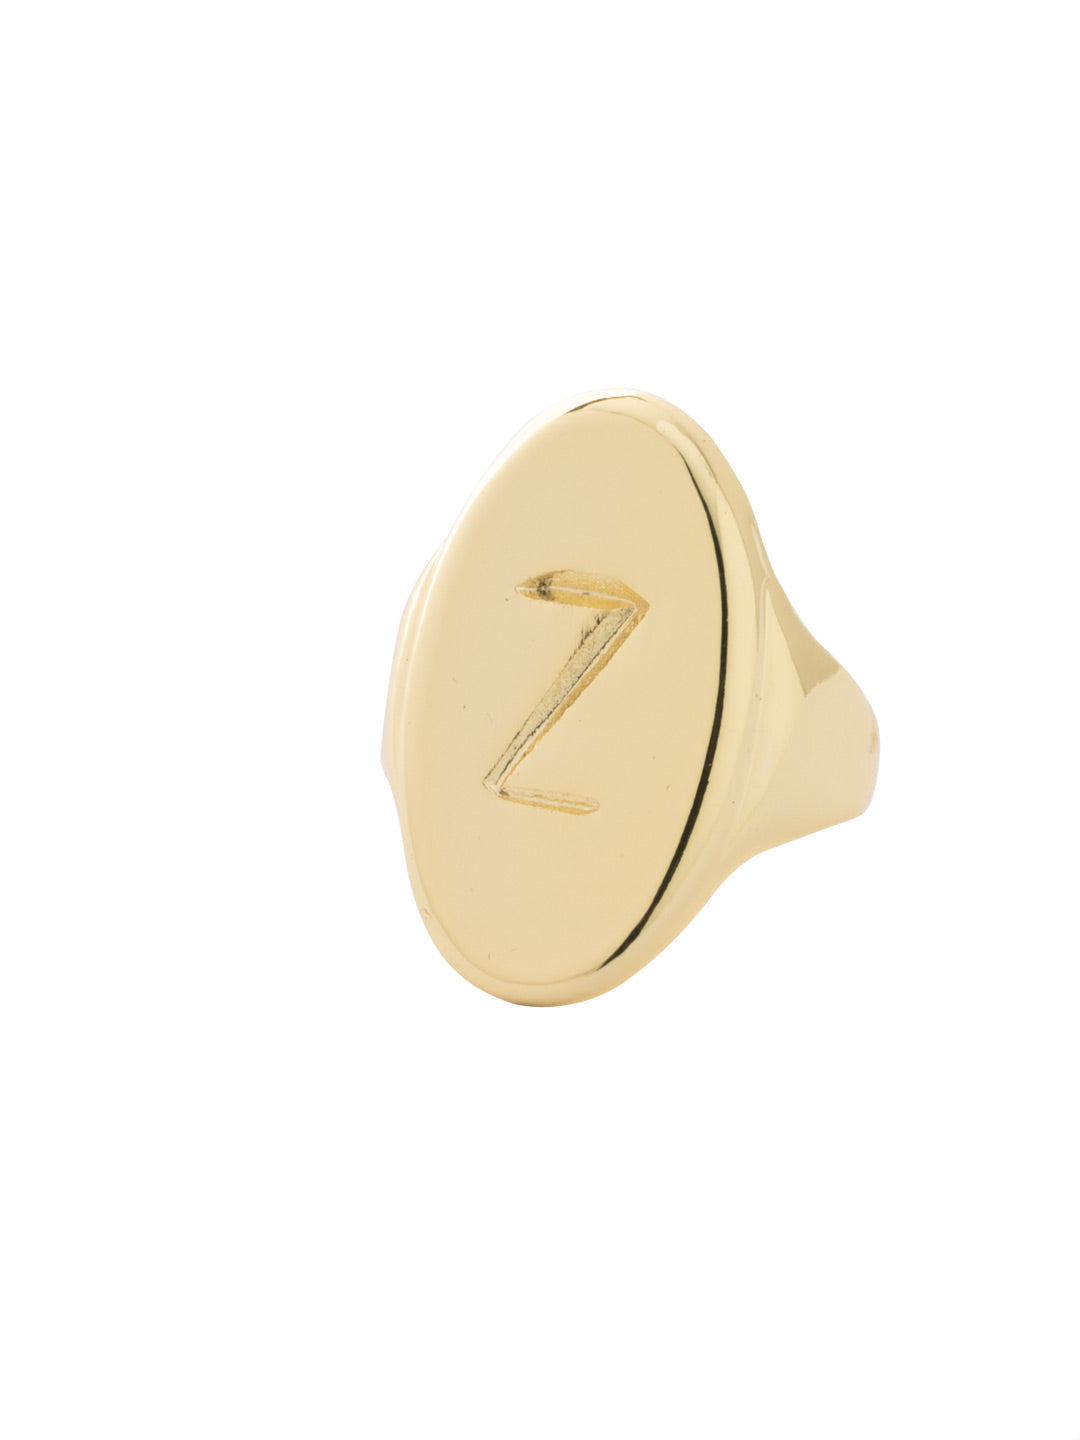 "Z" Signet Statement Ring - RFK55BGMTL - <p>The Signet Statement Ring features a capital letter stamped into an oblong metal disk on an adjustable ring band. From Sorrelli's Bare Metallic collection in our Bright Gold-tone finish.</p>